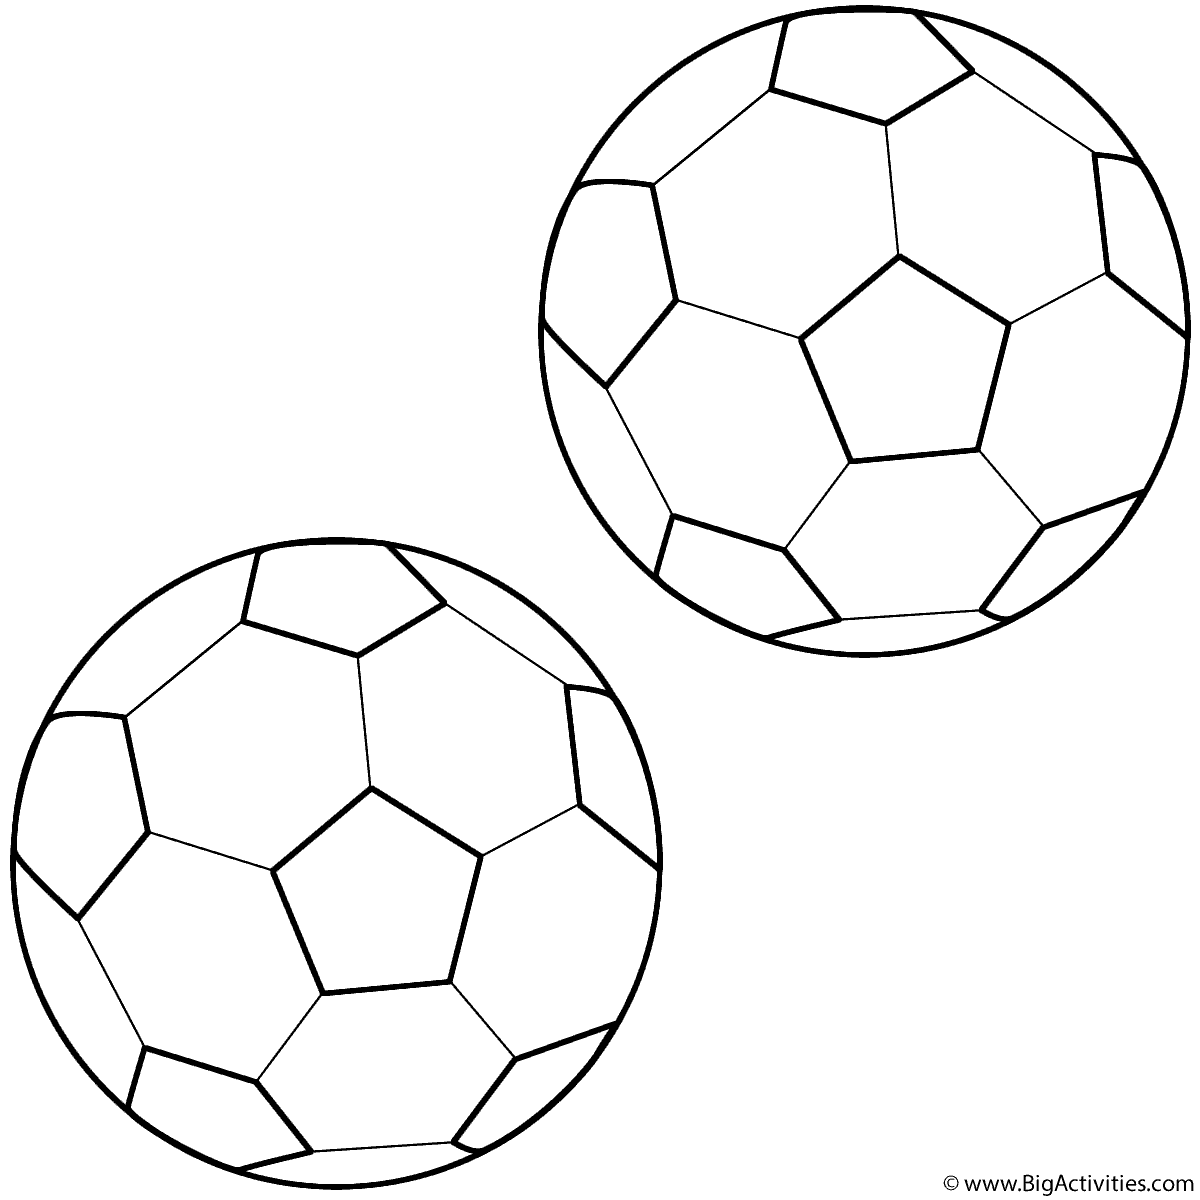 Soccer Balls - Coloring Page (World Cup)